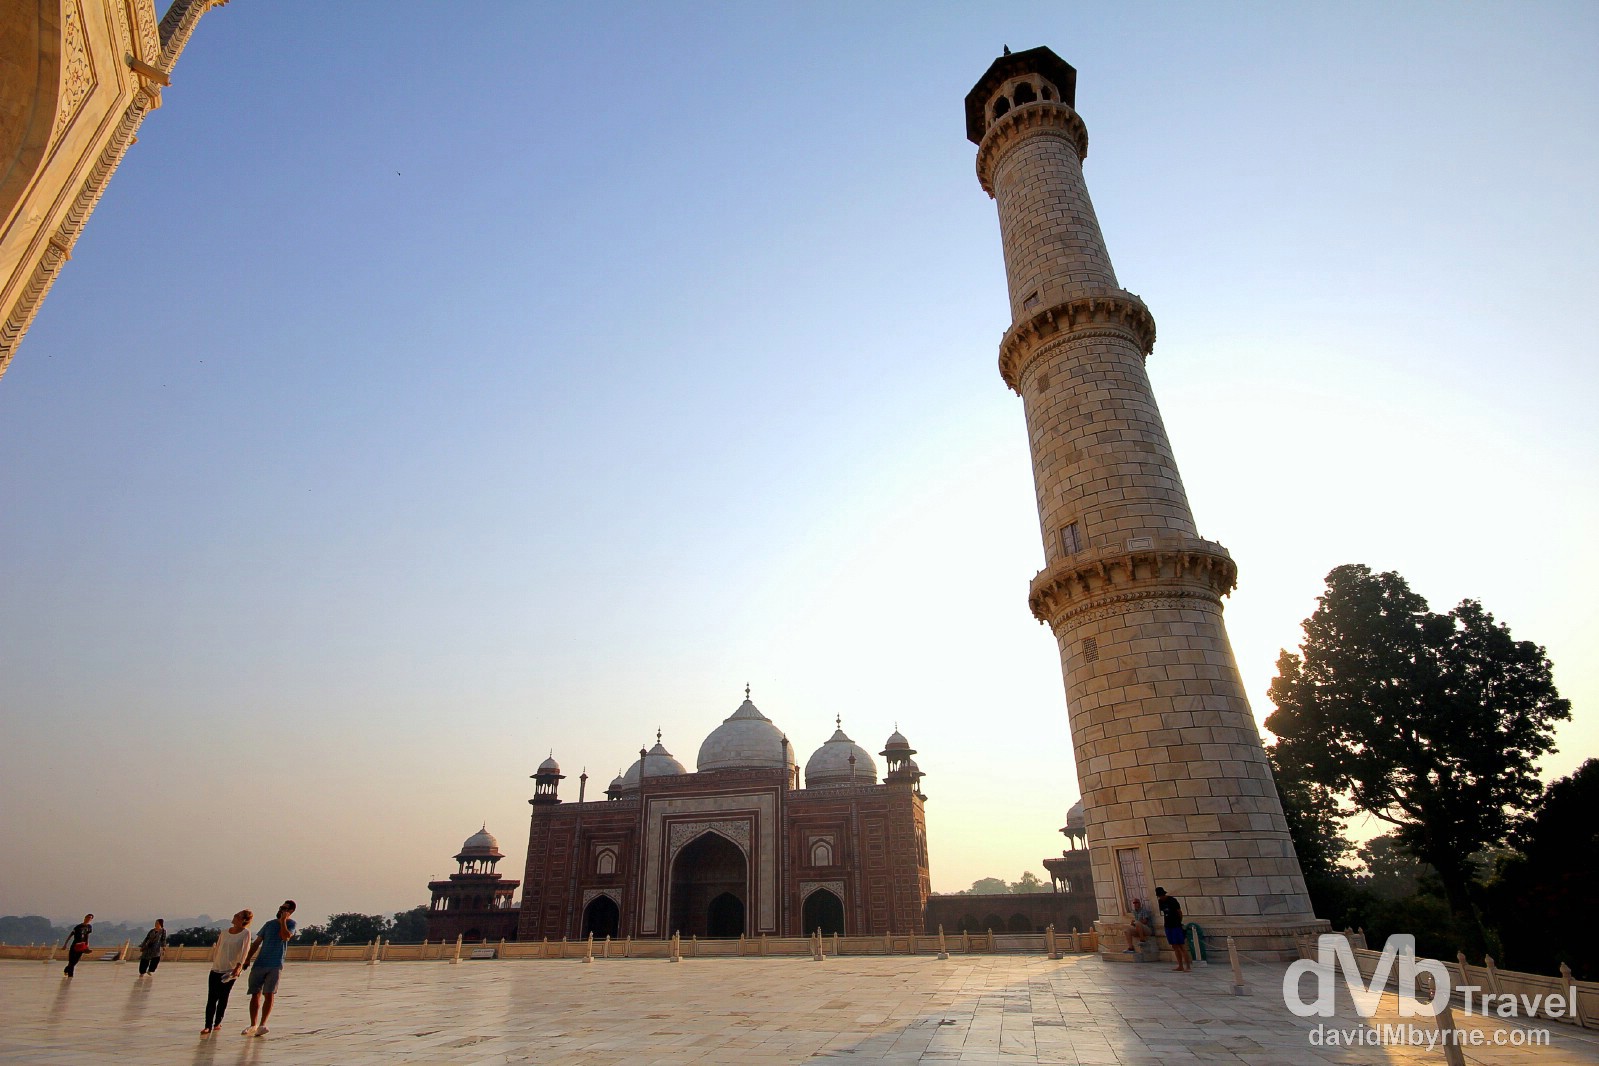 The rising sun is blocked by a minaret on the south-eastern corner of the raised marble platform upon which sits the Taj Mahal, Agra, Uttar Pradesh, India. October 11th 2012.